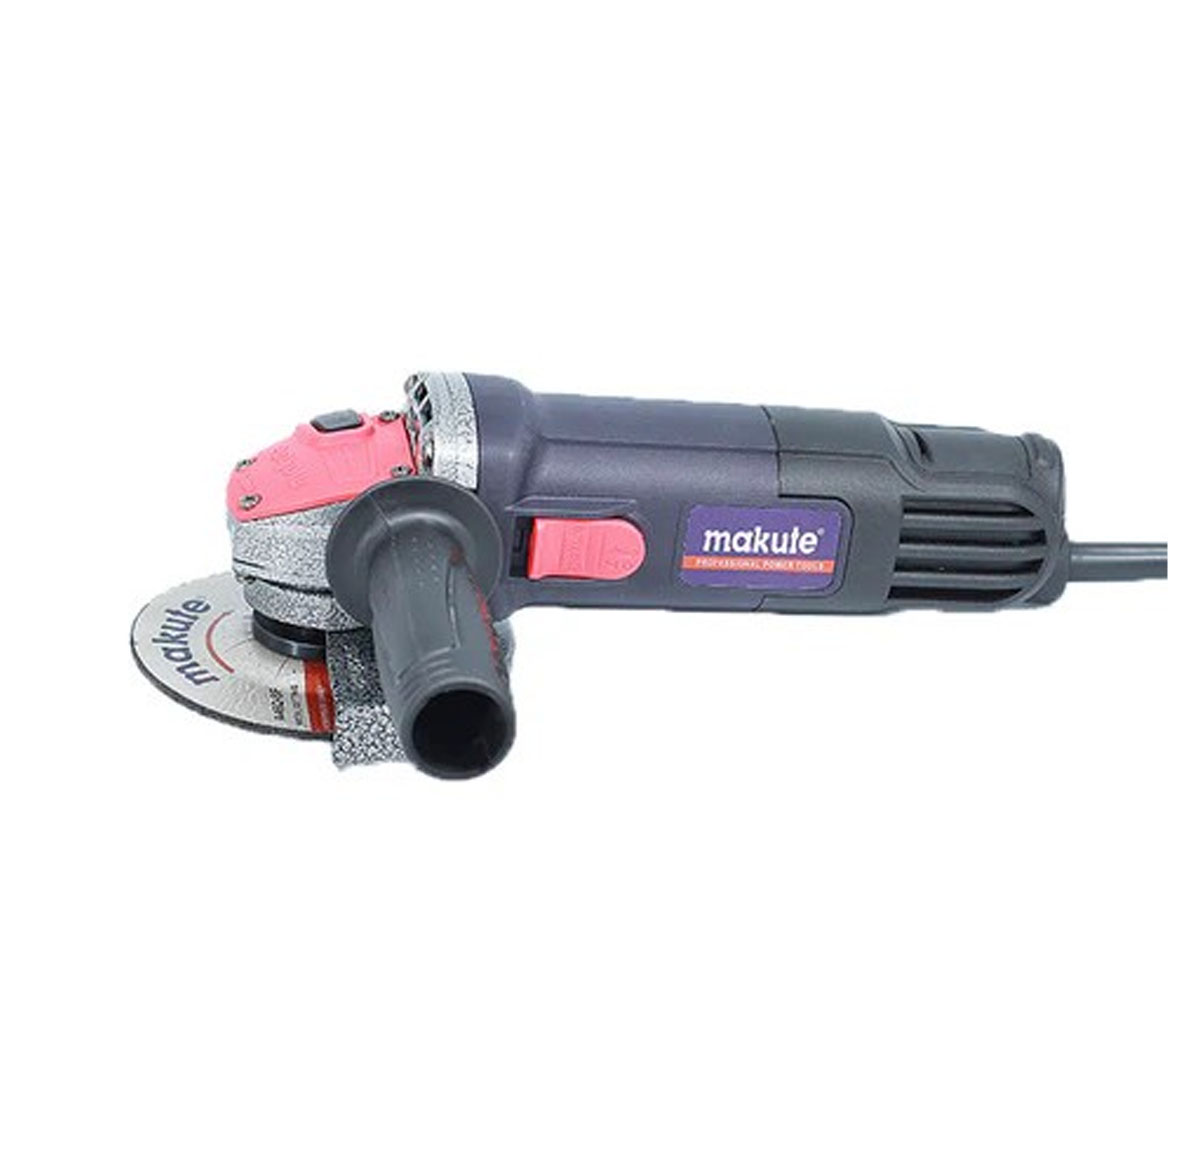 MAKUTE 4INCH ANGLE GRINDER AG009 - 100% COPPER WINDING